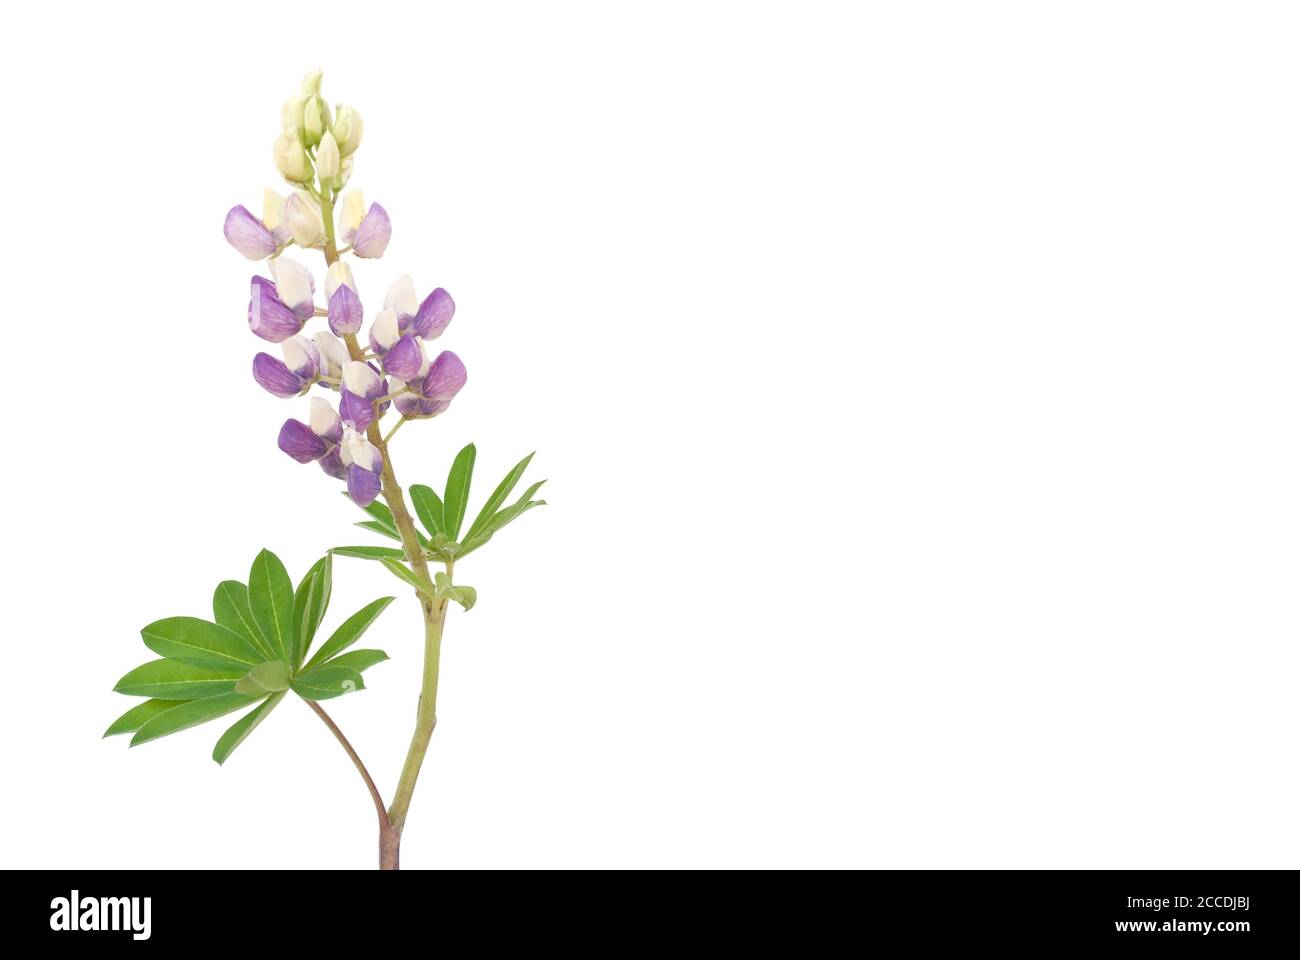 isolated lupine flowers lies on white background Stock Photo